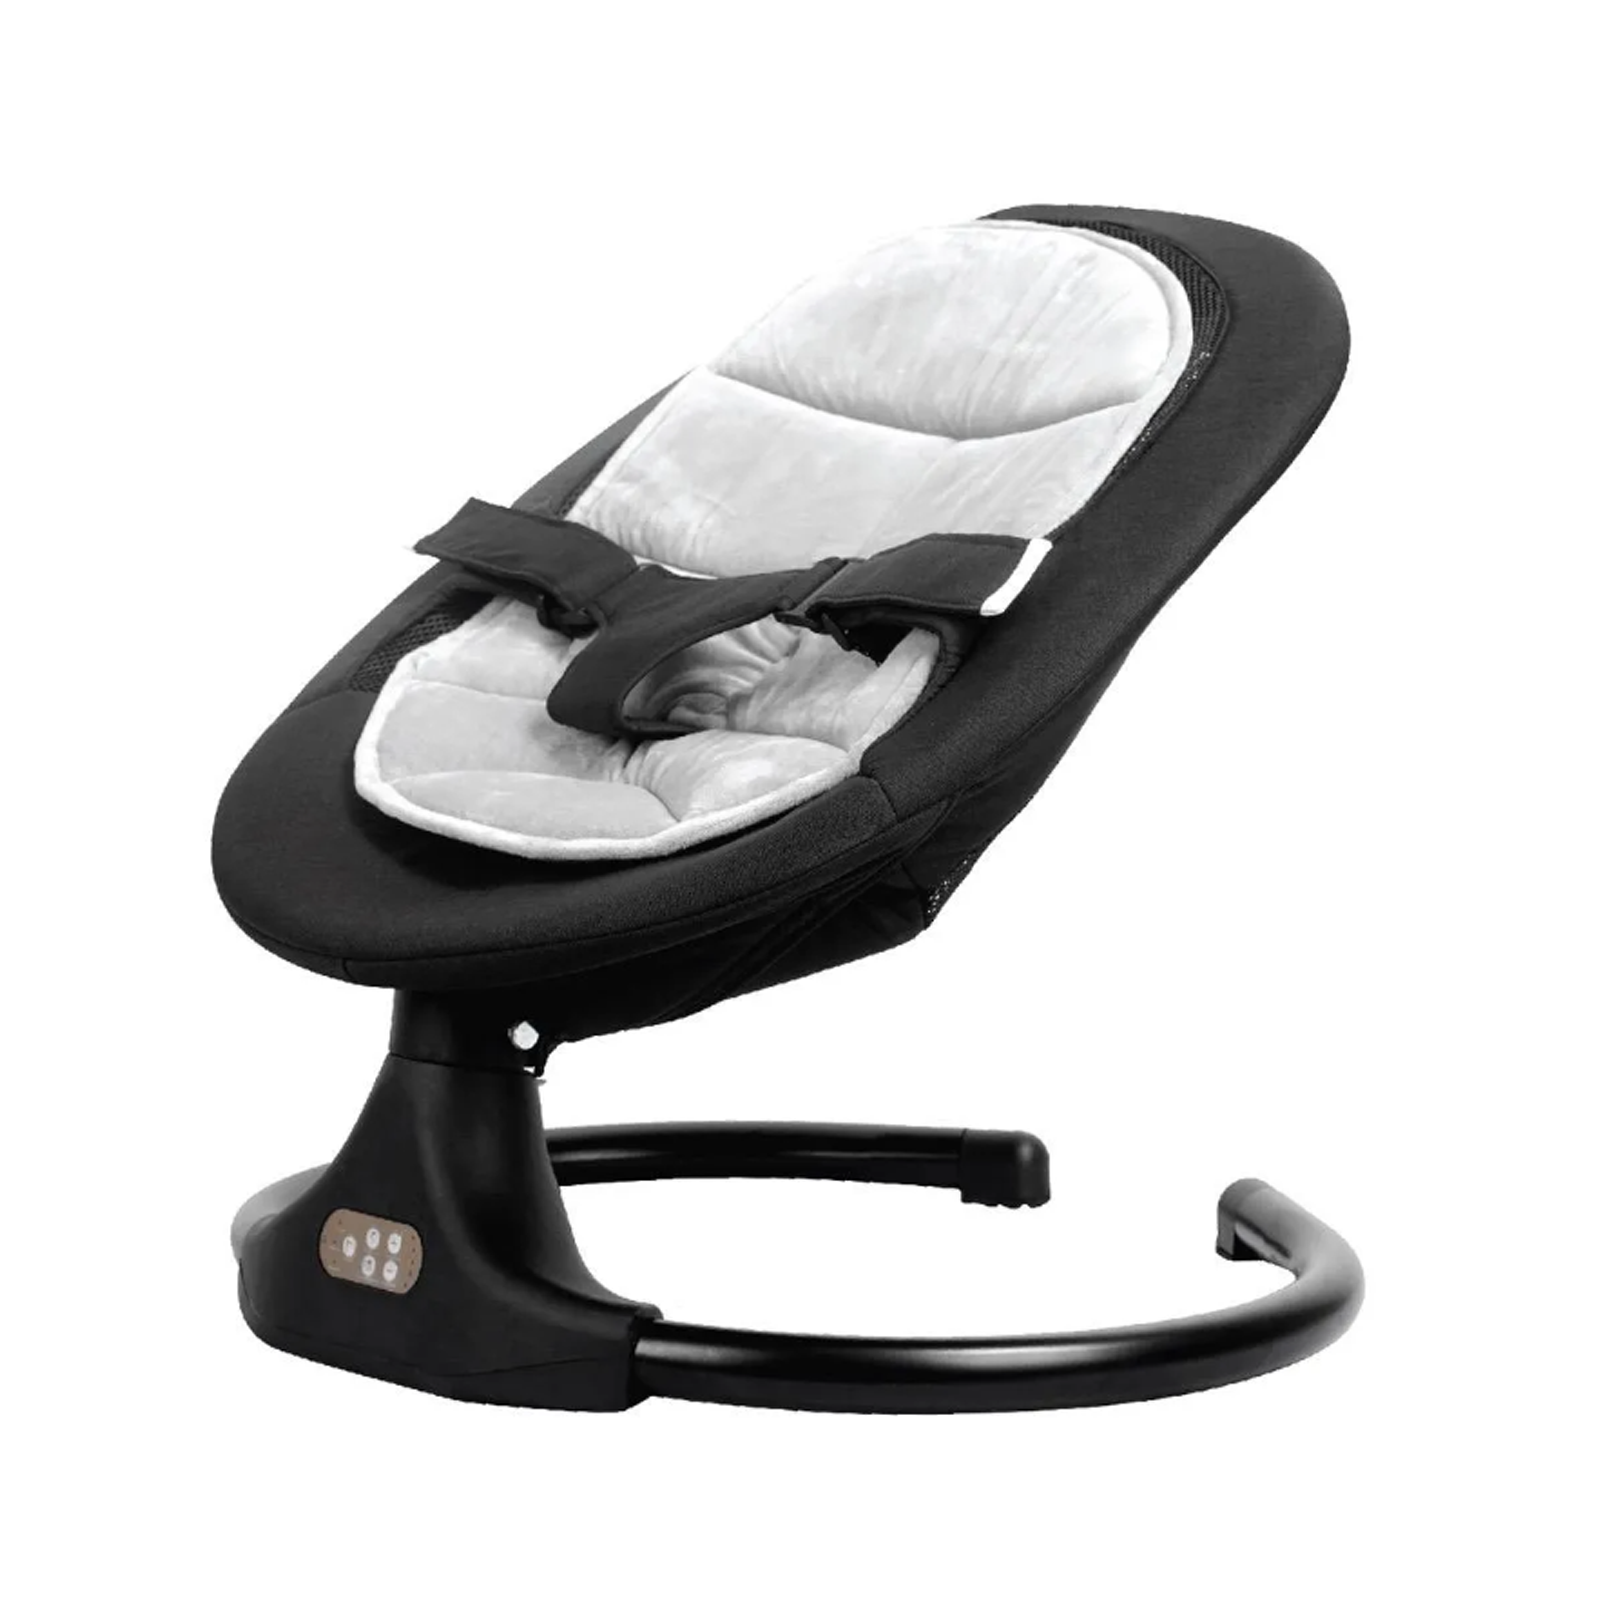 New Model Auto  Baby Cradle Swing Leaf Shape Rocking Chair With Mosquito Net (BAY0145)